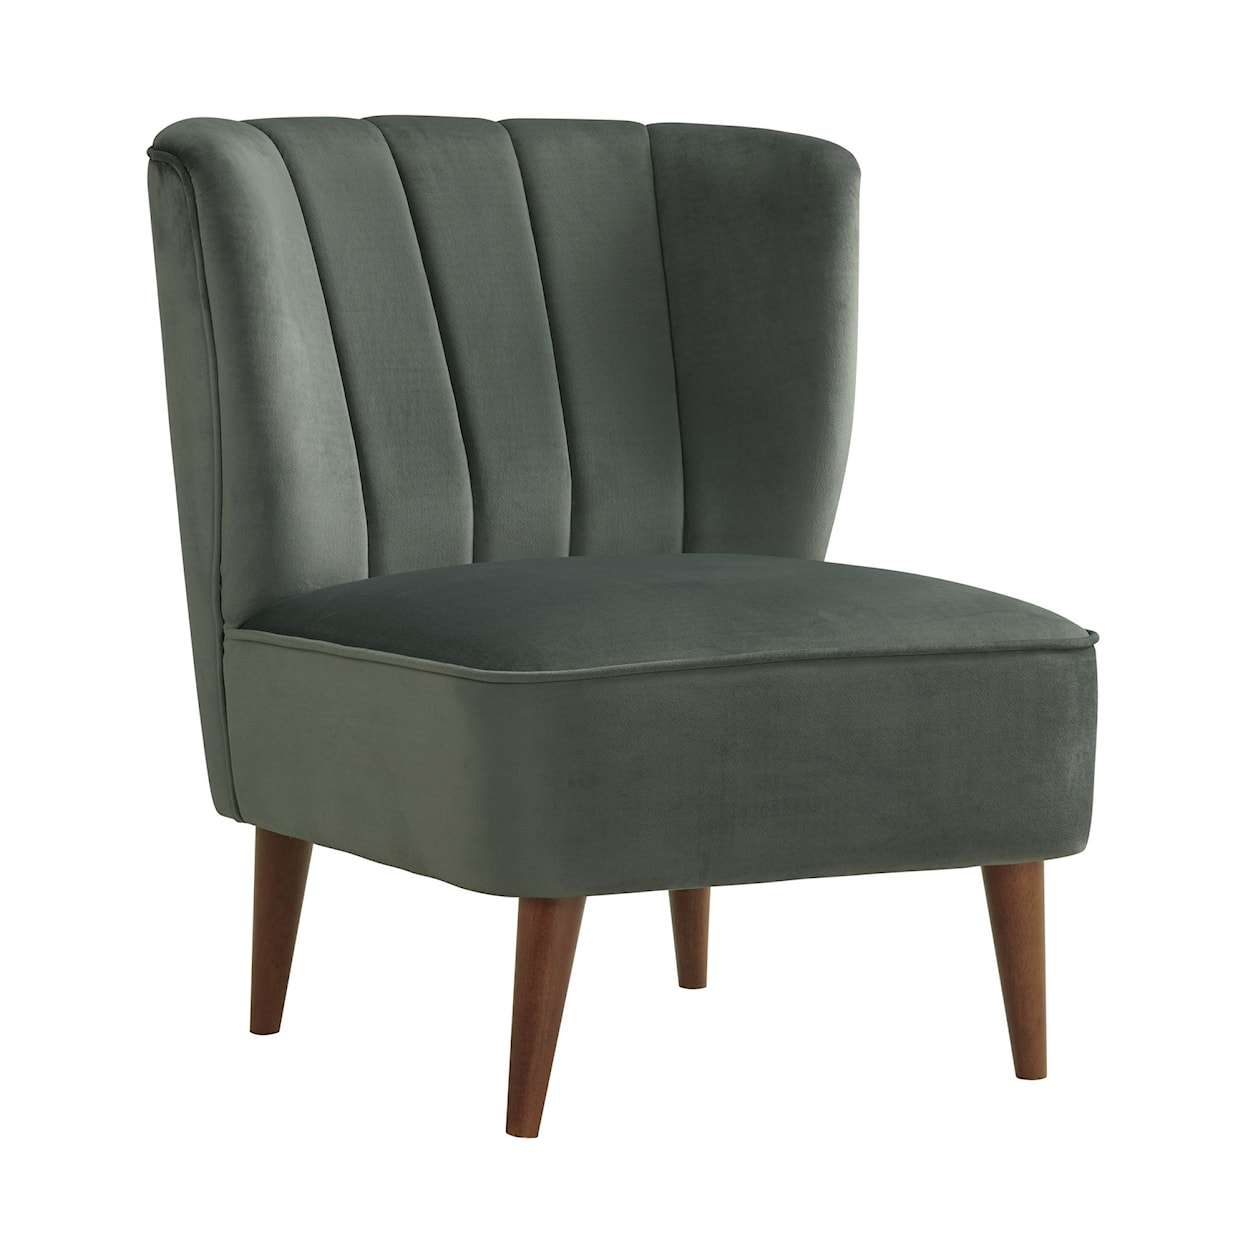 Elements International Joss Channel Upholstered Accent Chair